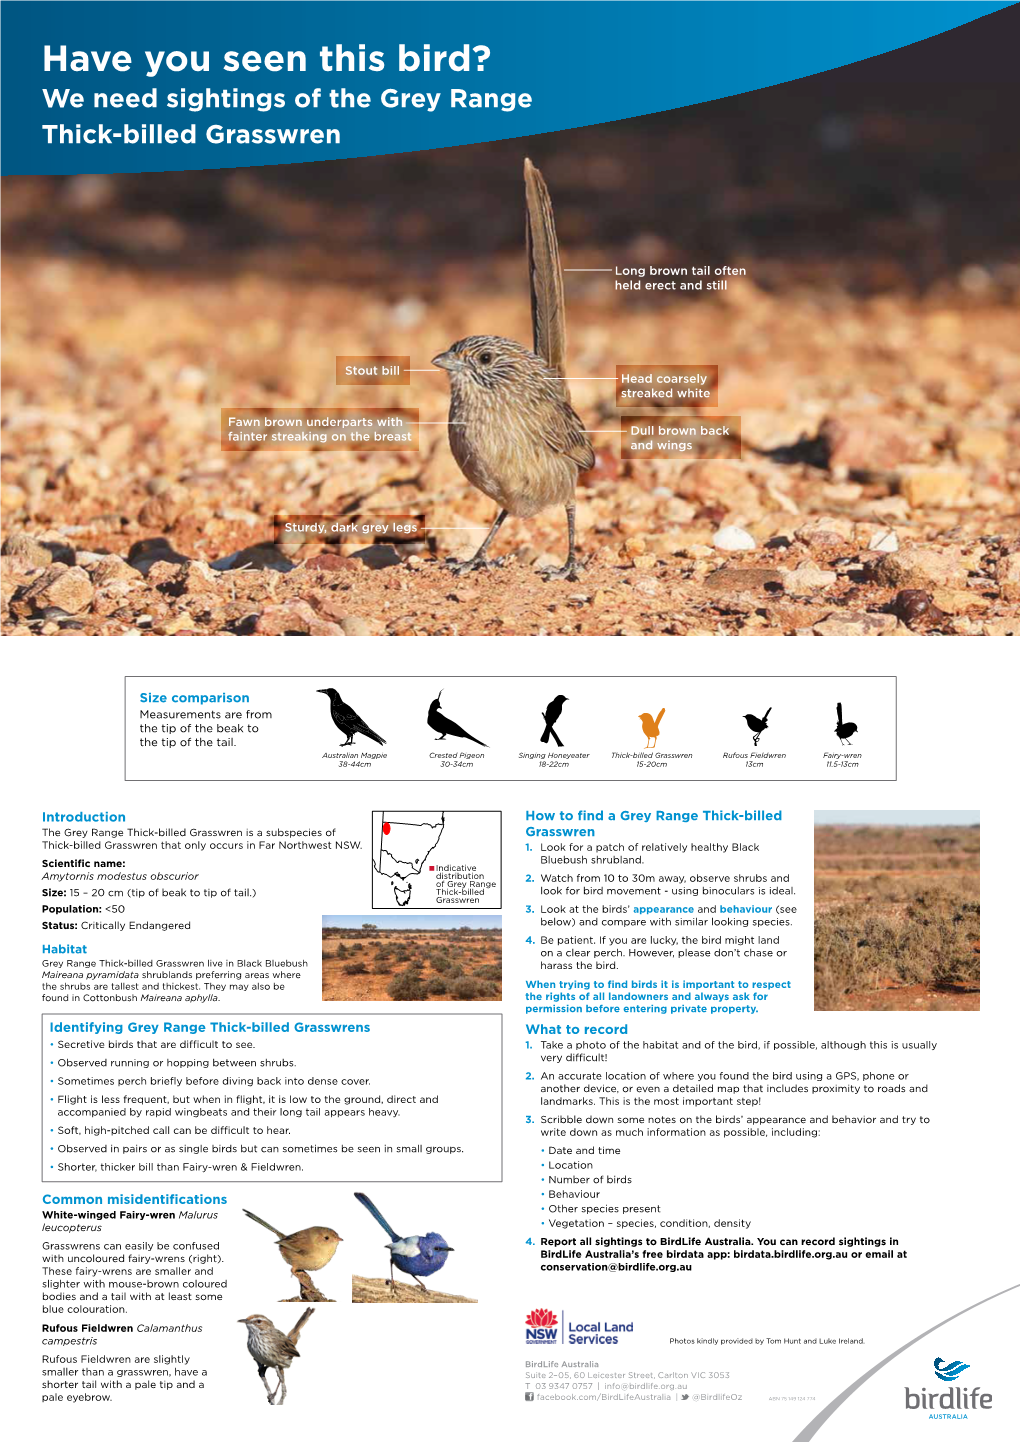 Have You Seen This Bird? We Need Sightings of the Grey Range Thick-Billed Grasswren